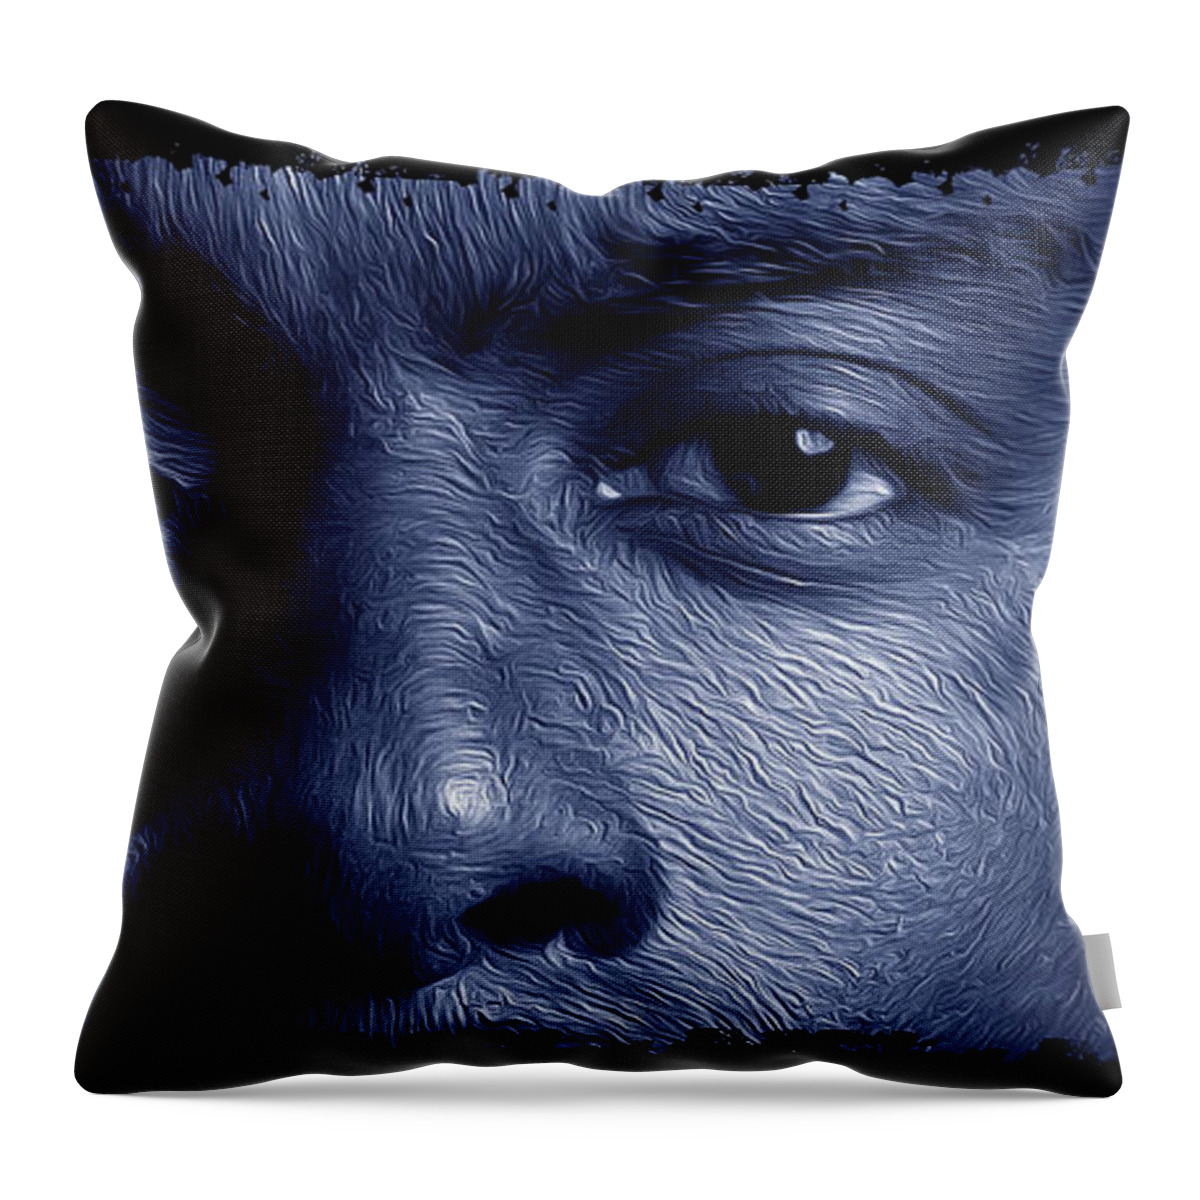 Shades Collection 2 Throw Pillow featuring the digital art Shades of Black 8 by Aldane Wynter